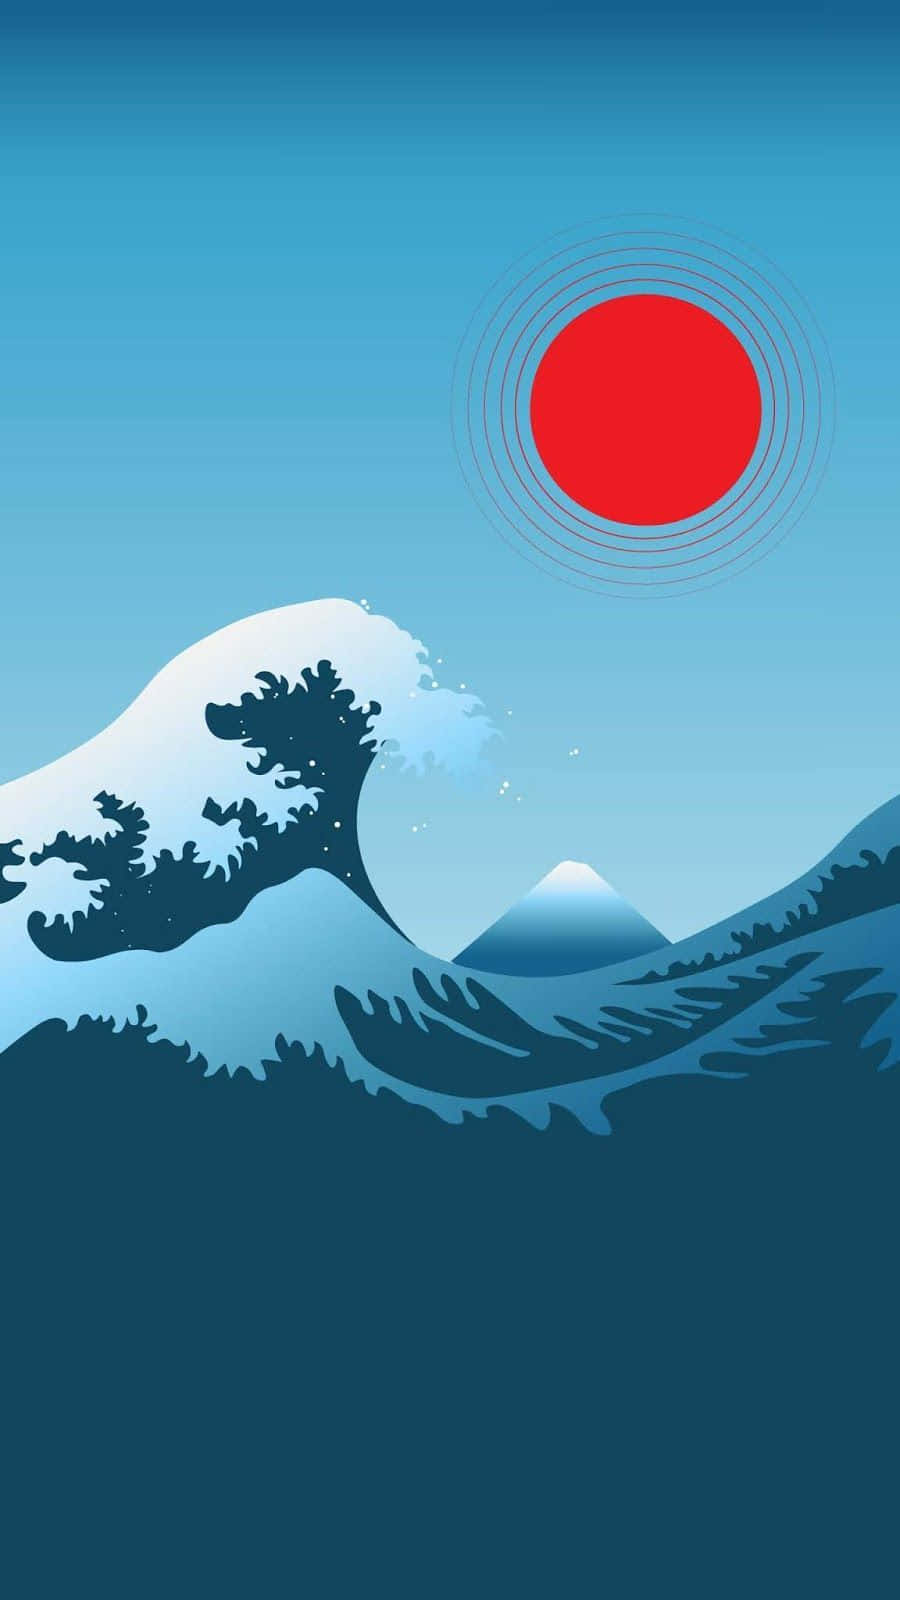 The Great Wave wallpaper for iPhone and Android - Wave